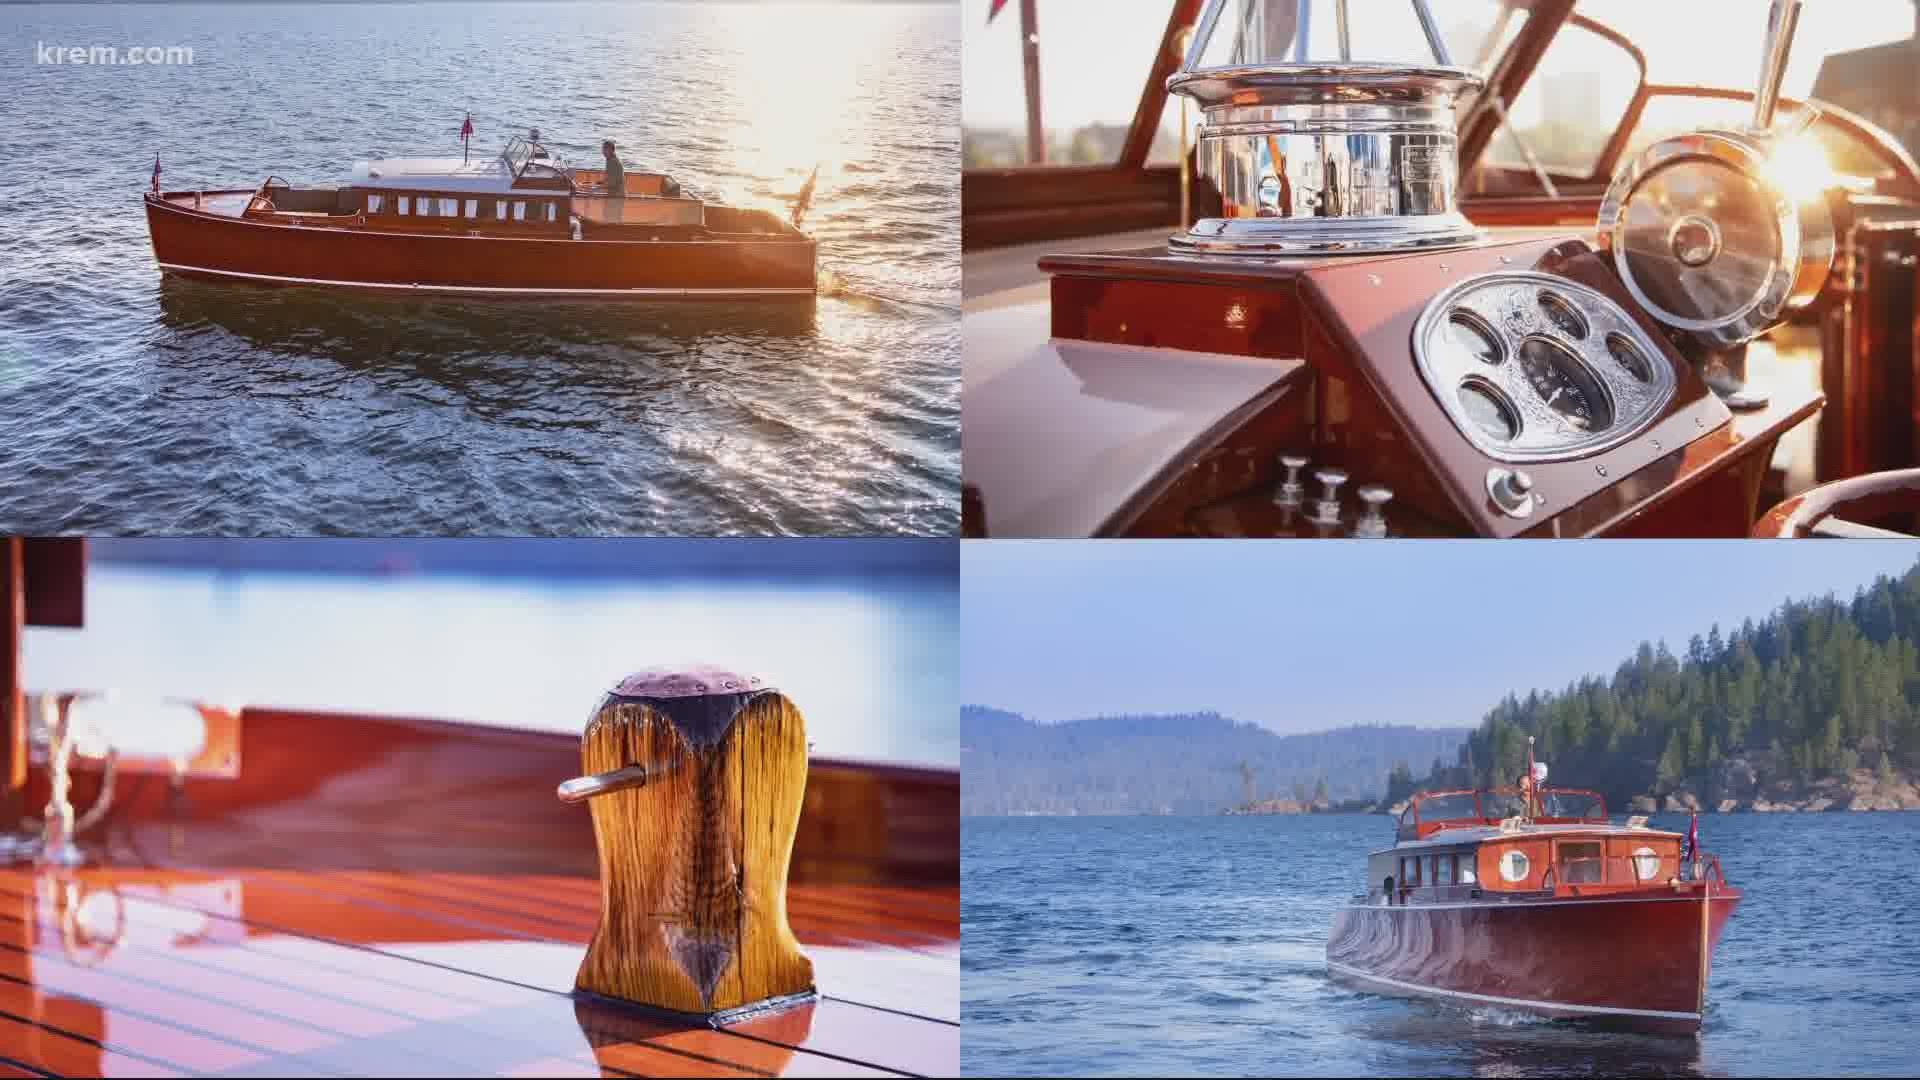 Willow, a 38-foot wooden yacht, includes seating for 12 passengers. It is a 14-month restoration of Chris-Craft's first-ever 1929 Commuter Cruiser.